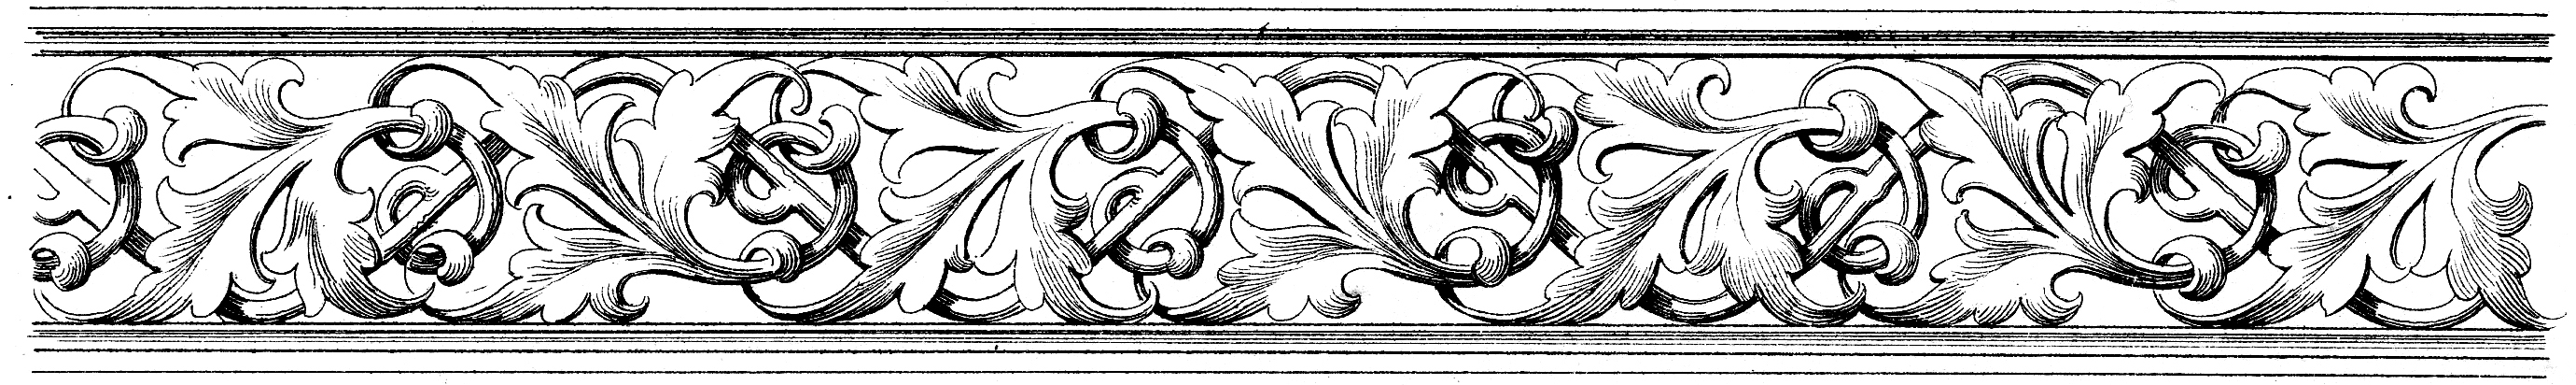 Ornament and Graphics